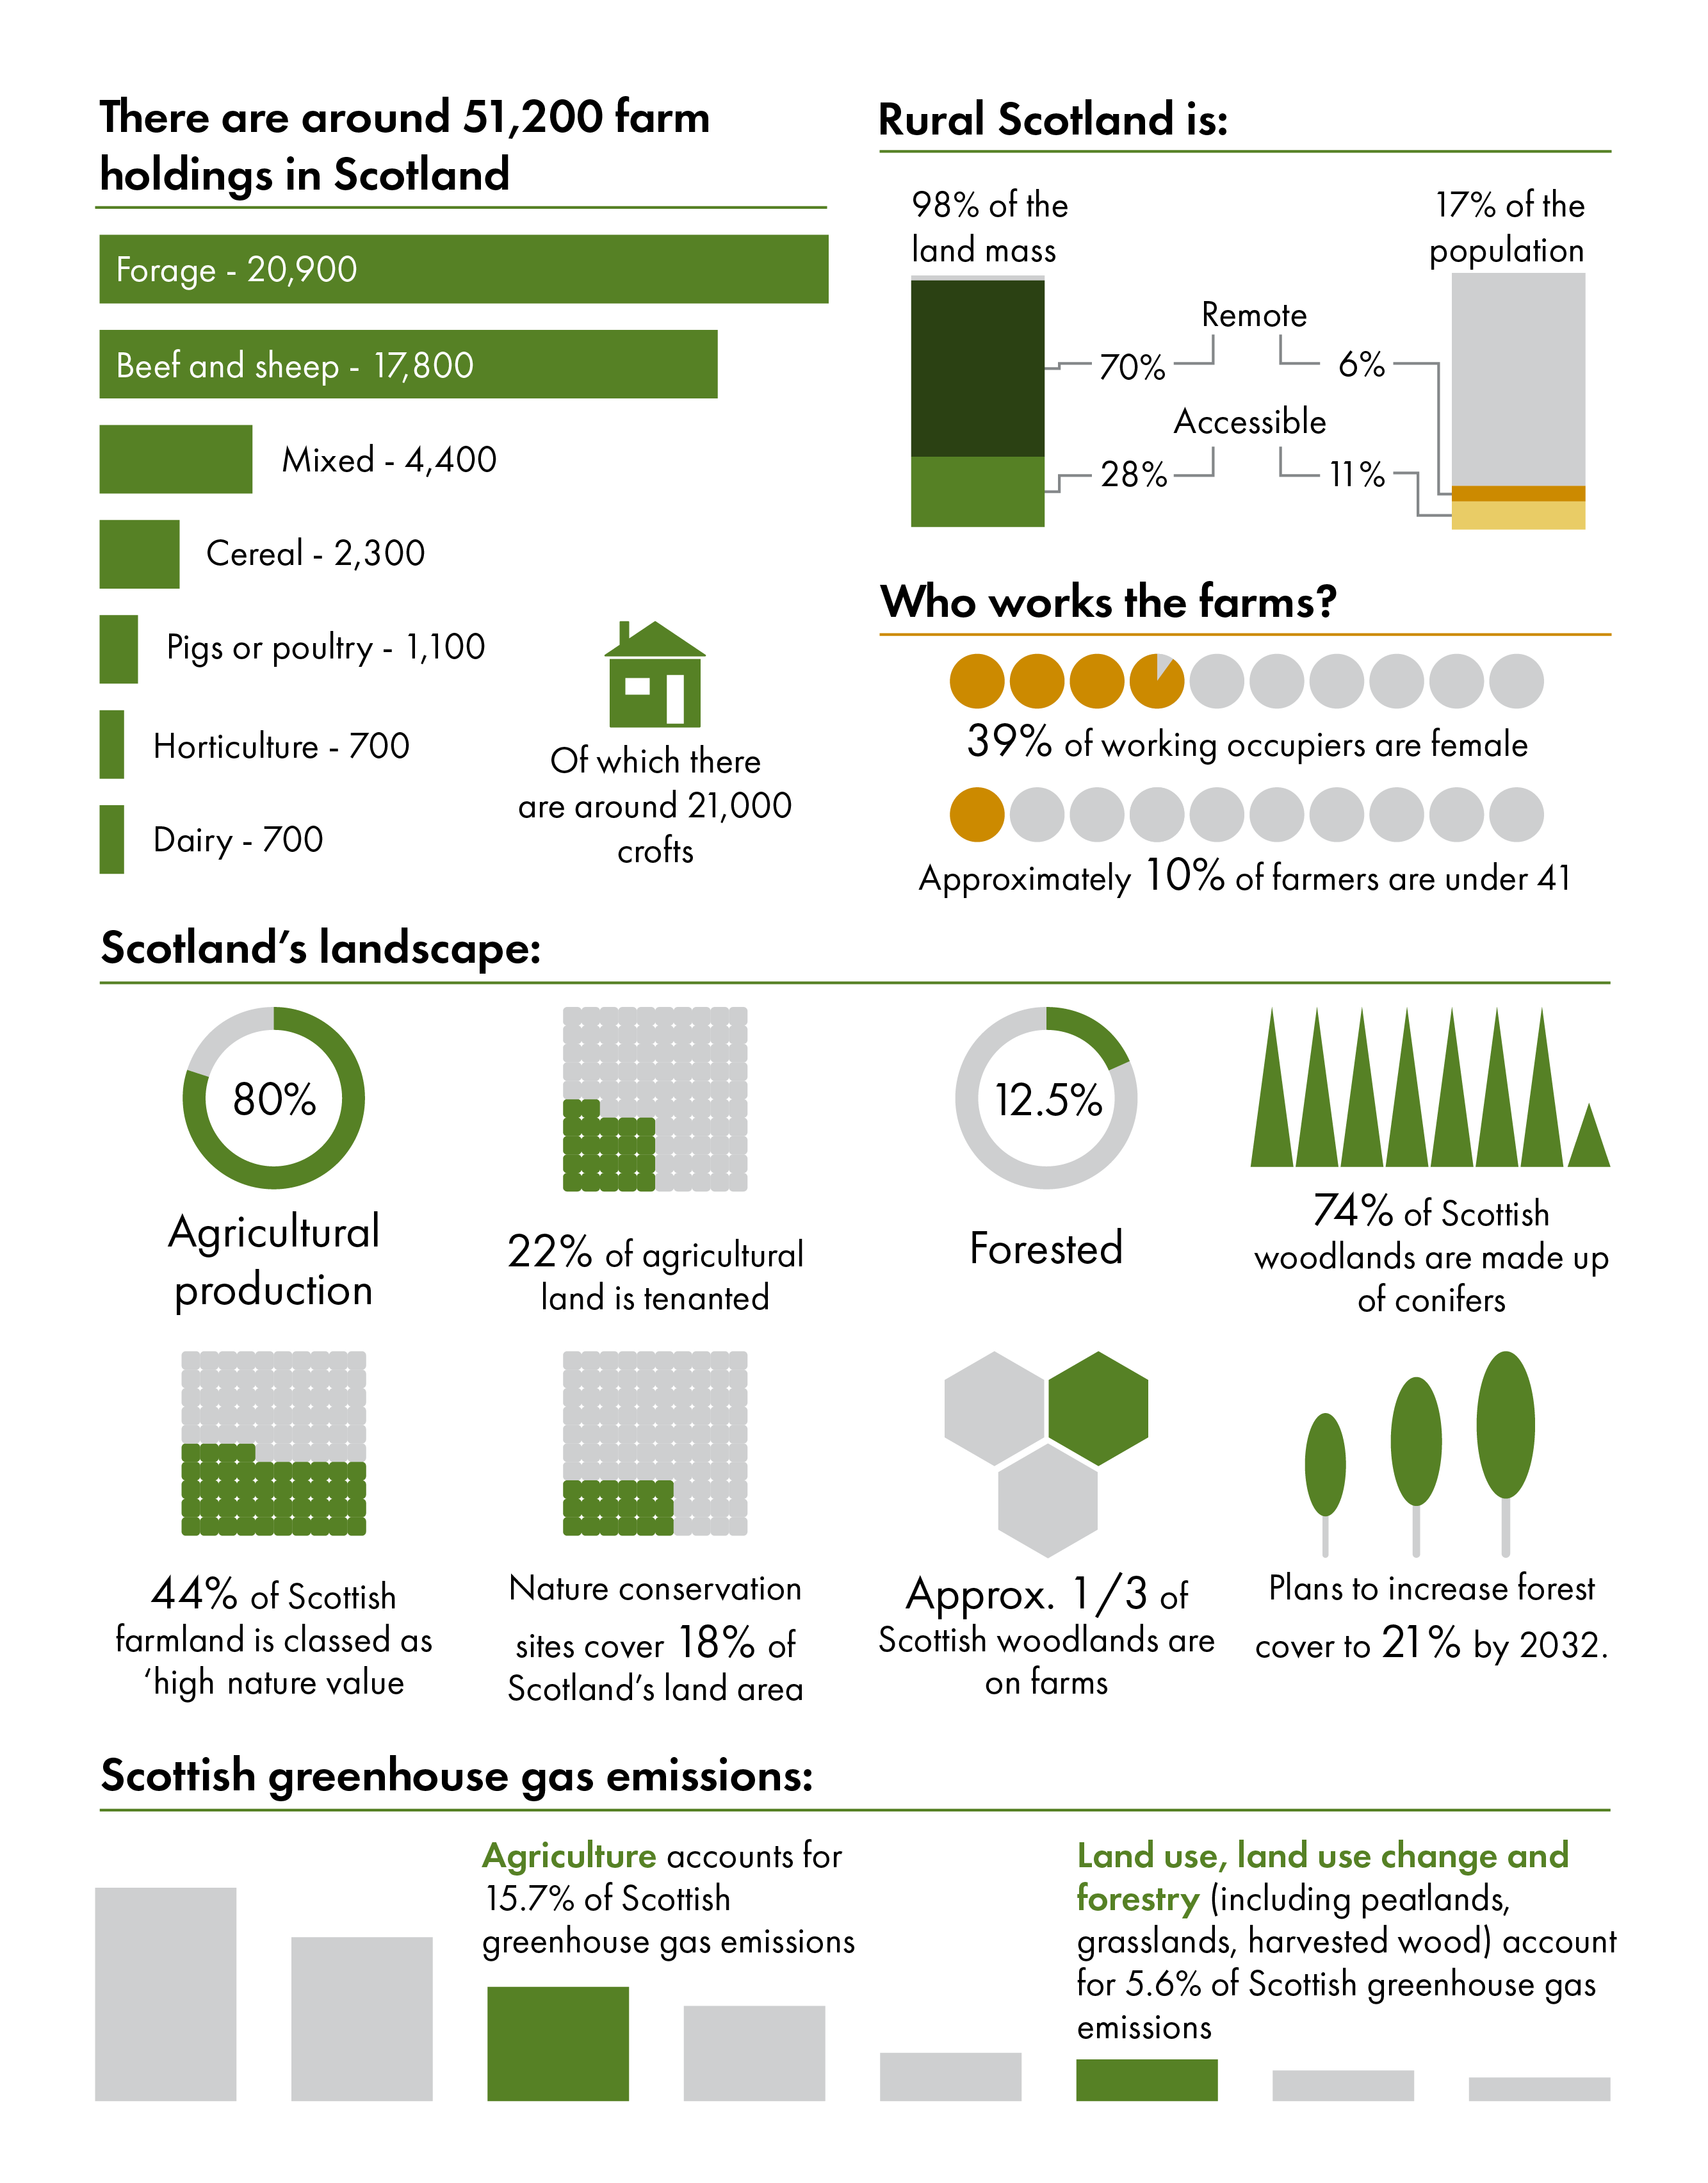 There are around 51,000 farms in Scotland, of which 21,000 are crofts. Forage makes up the largest group with 20,900 holdings, followed by beef and sheep at 17,800, mixed farming at 4,400, cereals at 2,300, pigs and poultry at 1,100, and horticulture and dairy at 700 holdings respectively. Rural Scotland is 98% of the land mass, with accessible rural making up 70% and remote rural 17%. 39% of working occupiers are female, and approximately 10% of farmers are under 41. 80% of Scotland landscape is agricultural land; 44% of which is classed as high nature value farmland. Nature conservation sites cover 18% of Scotland's land area. 22% of Scotland's land is tenanted. 12.5% of Scotland is forested, and 1/3 of these forests are on farms. 74% of Scottish woodlands are made up of conifers, and there are plans to increase Scotland's forests to 21% by 2032. Agriculture accounts for 15.7% of Scotland's greenhouse gas emissions; land use, land use change and forestry accounts for 5.6%.